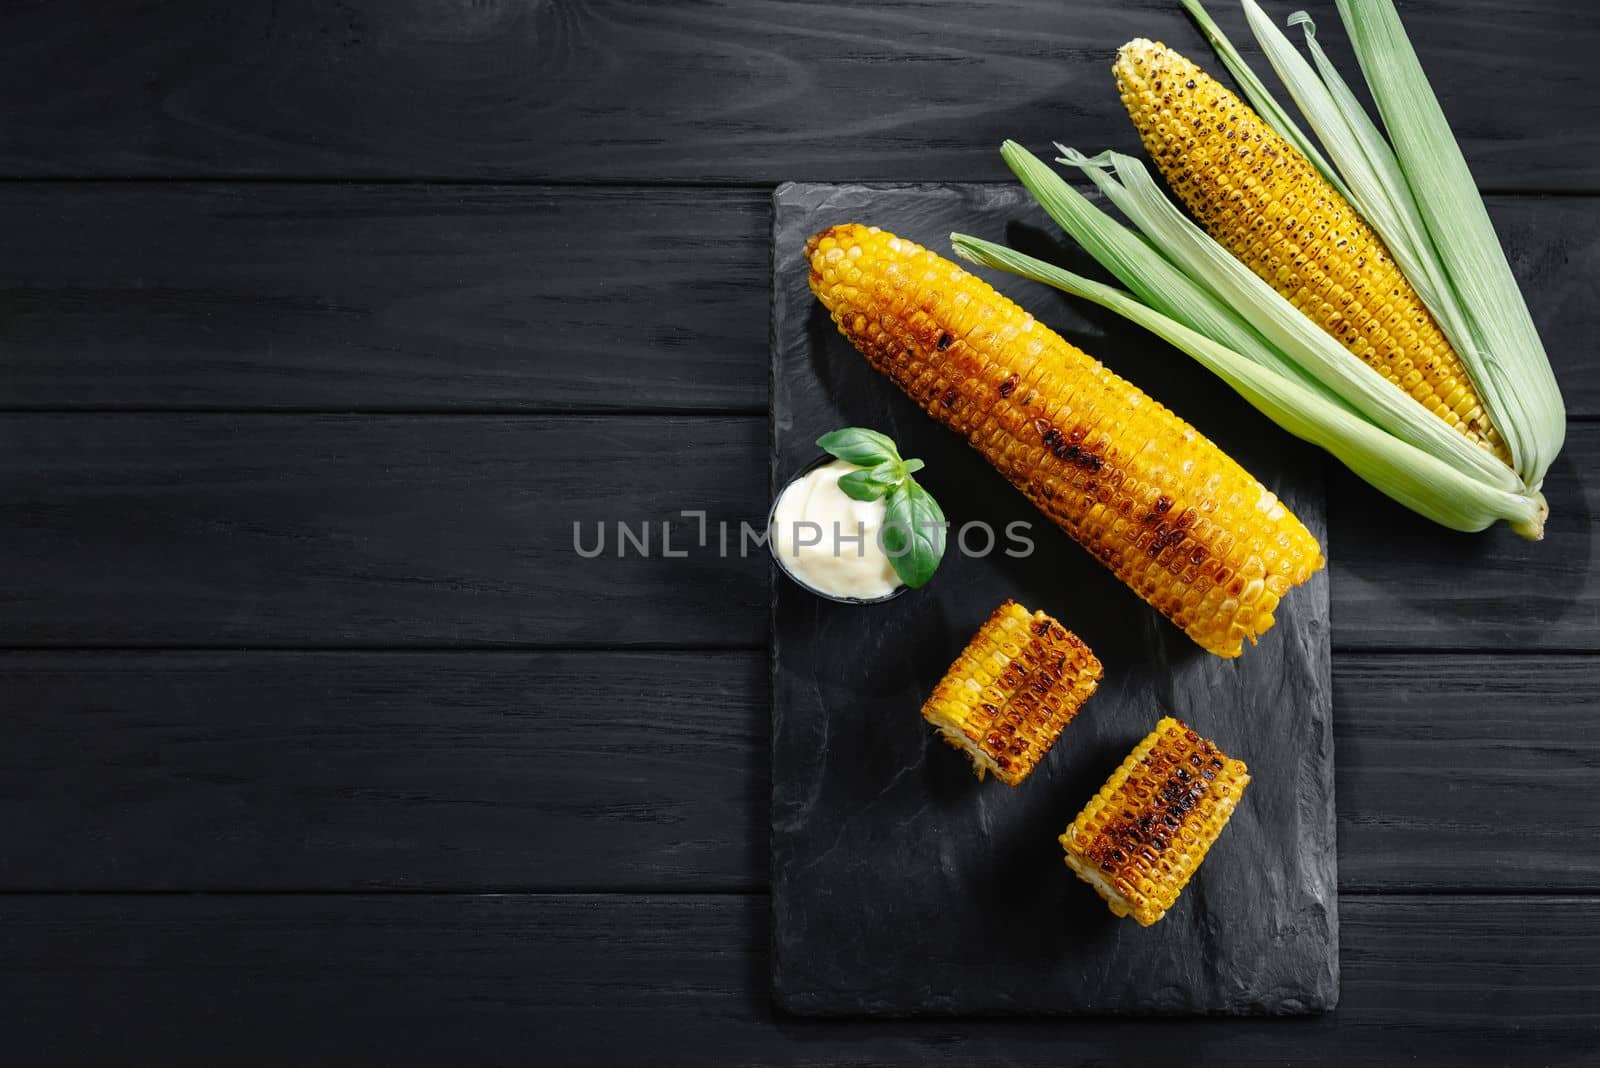 Grilled corn on slate to serve with sauce and lime. Top view and copy space